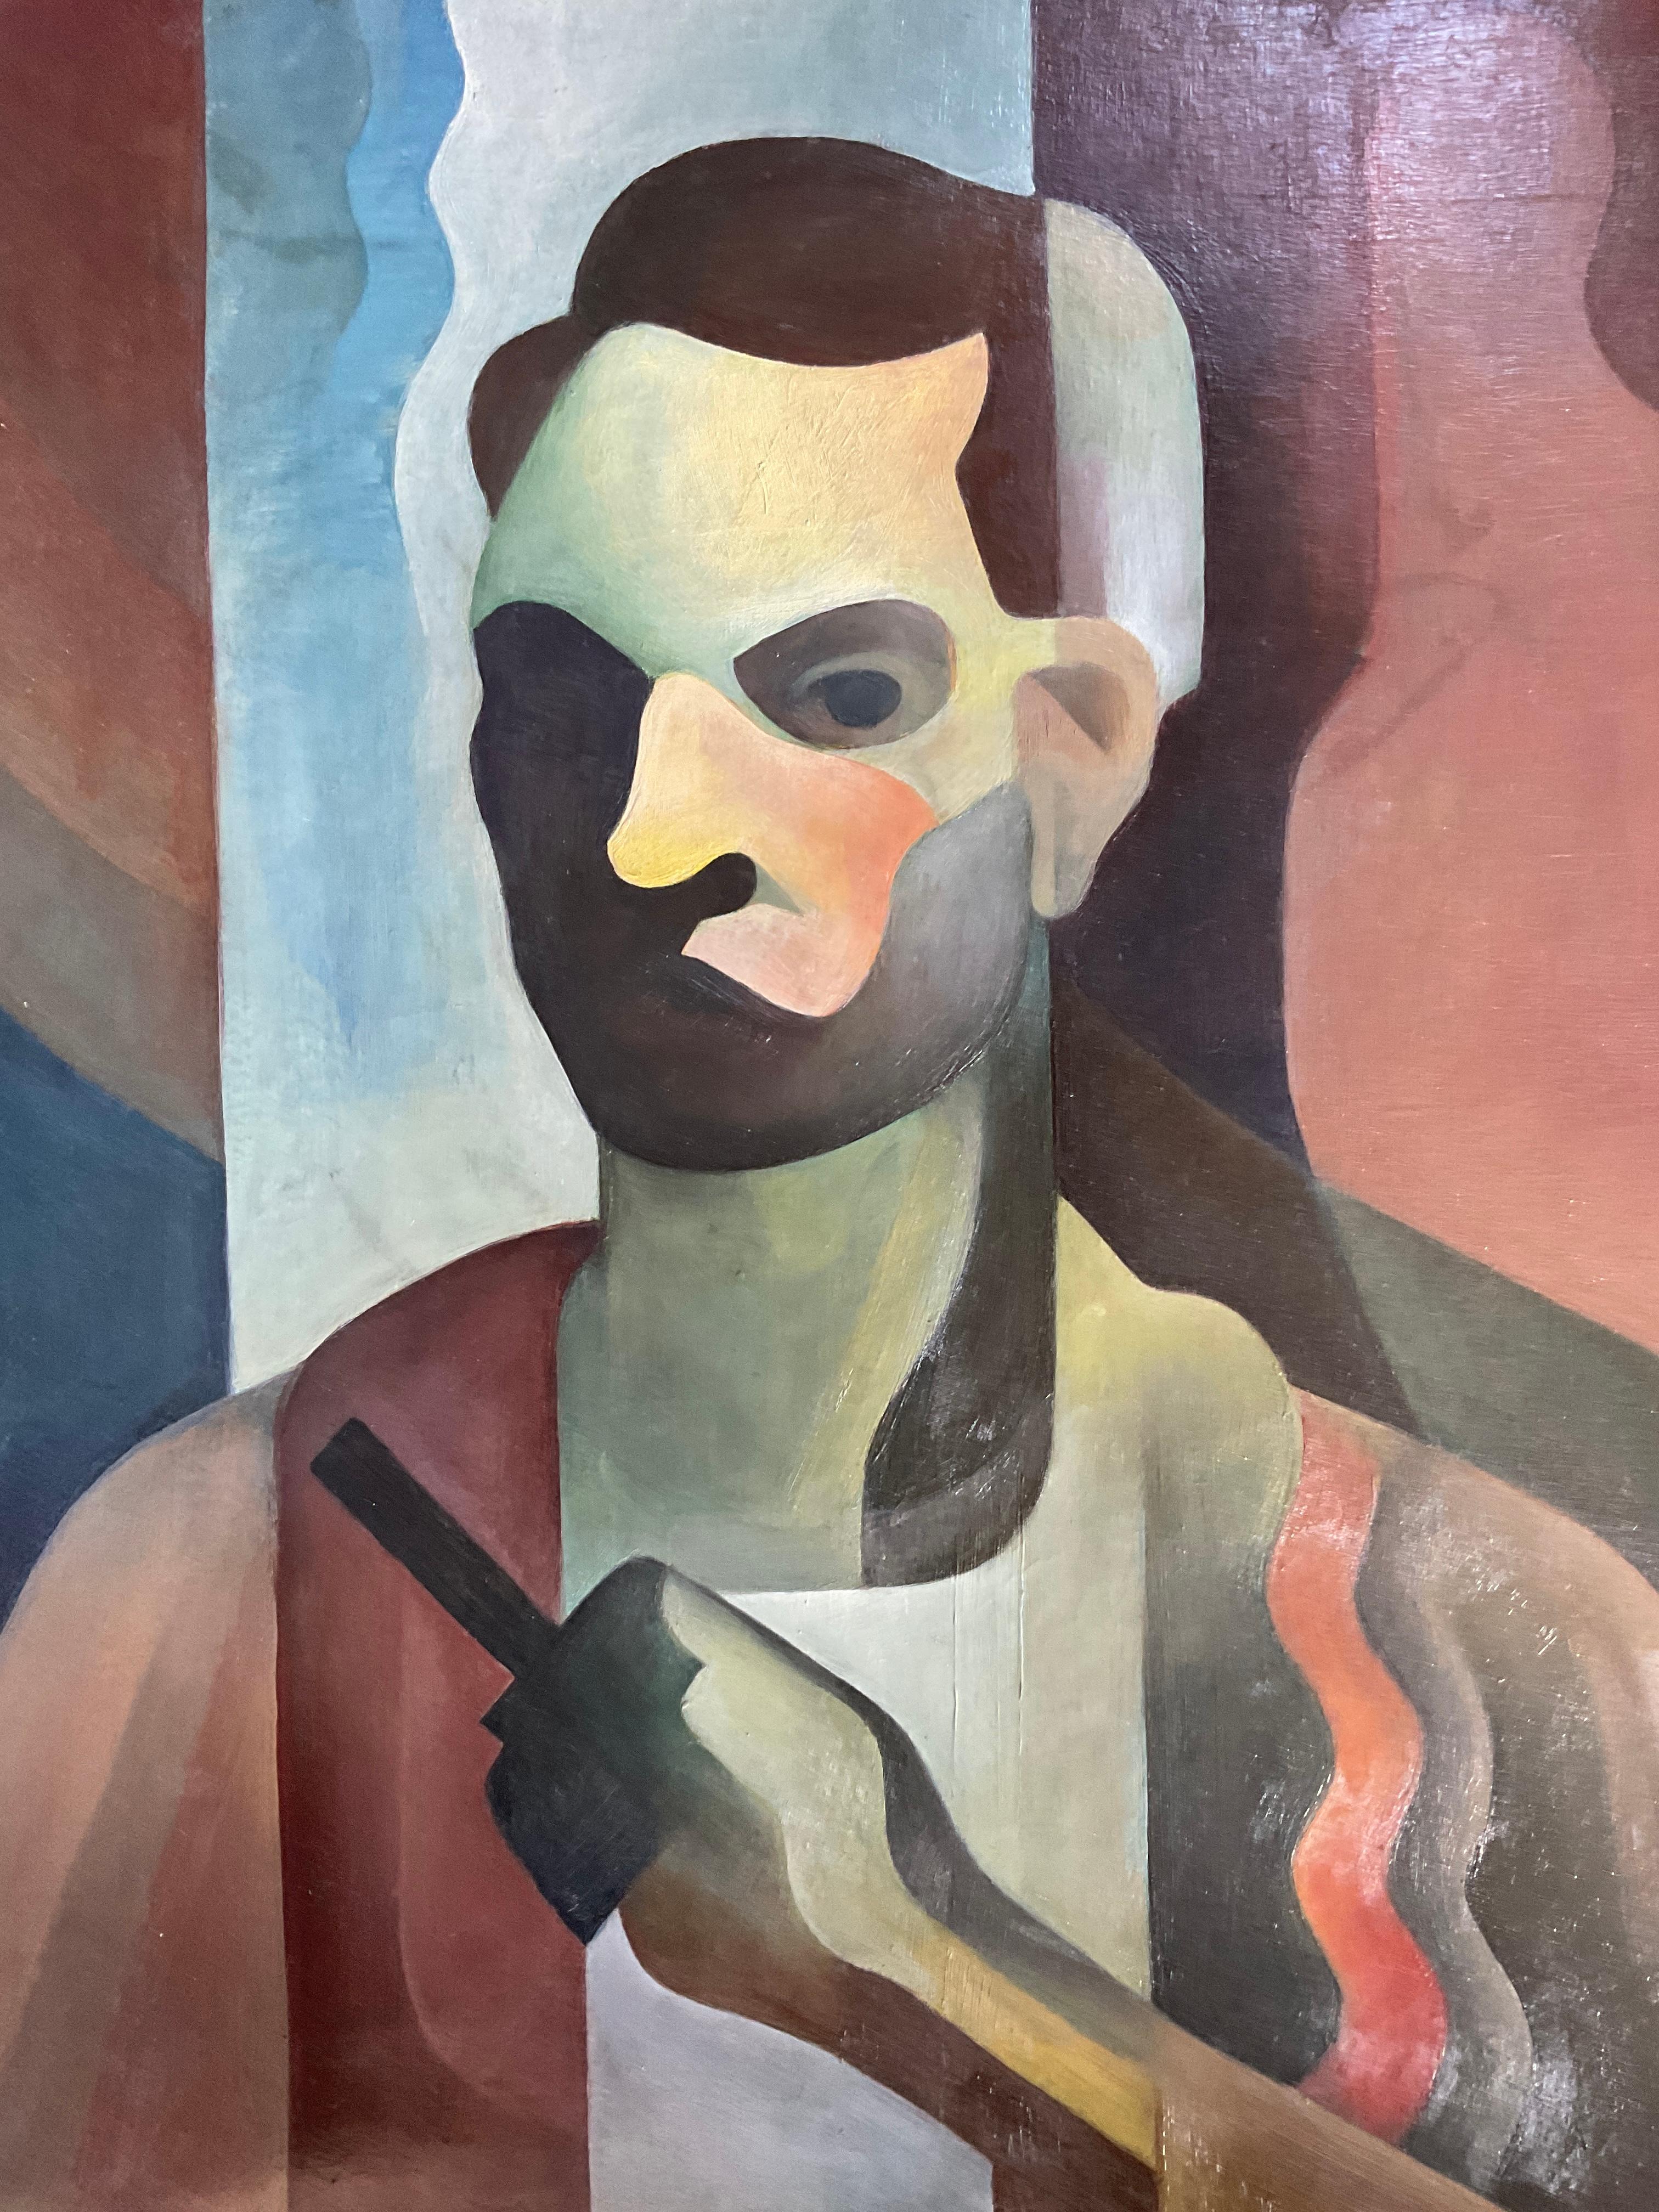 This is a very stylized and powerful portrait by the noted artist Frank Anderson Trapp.  It is dated 1940, and is very much in the modern style of French painters Ferdinand Leger and Le Corbusier.

Frank A. Trapp was born in Pittsburg in 1922. As a